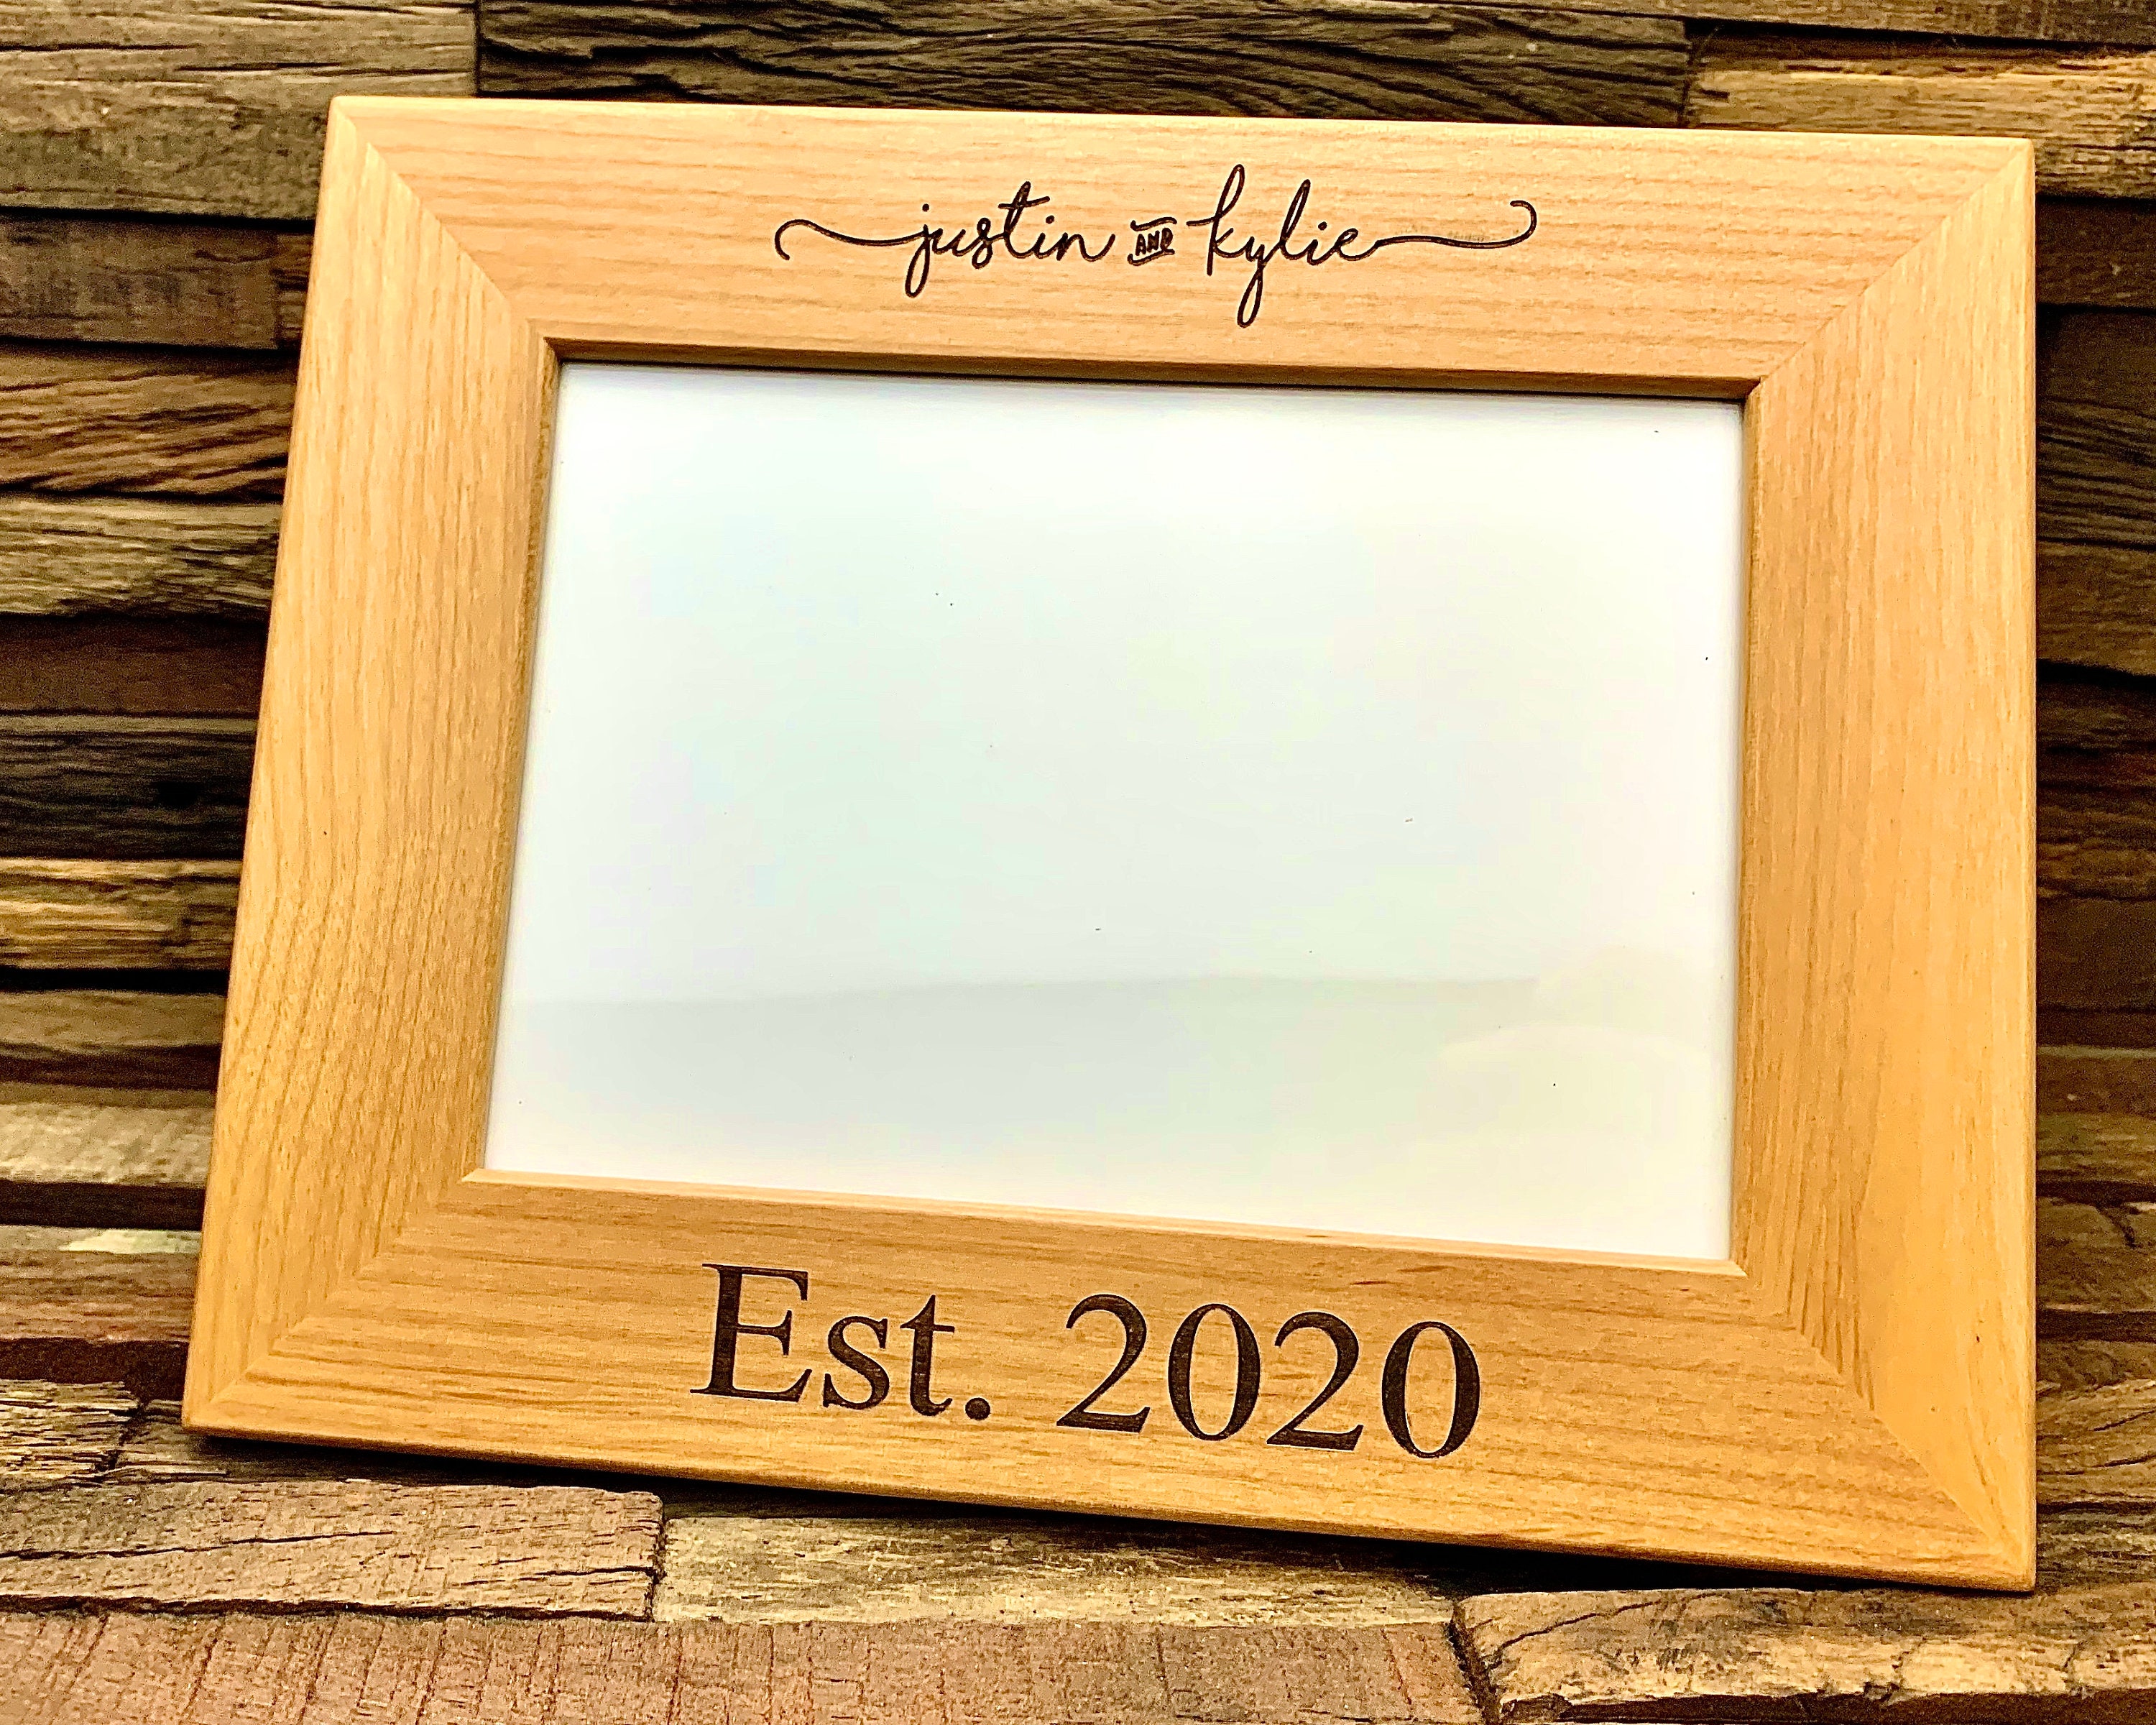 4x6-inch 2-6 Opening Mahogany Vertical Picture Frame